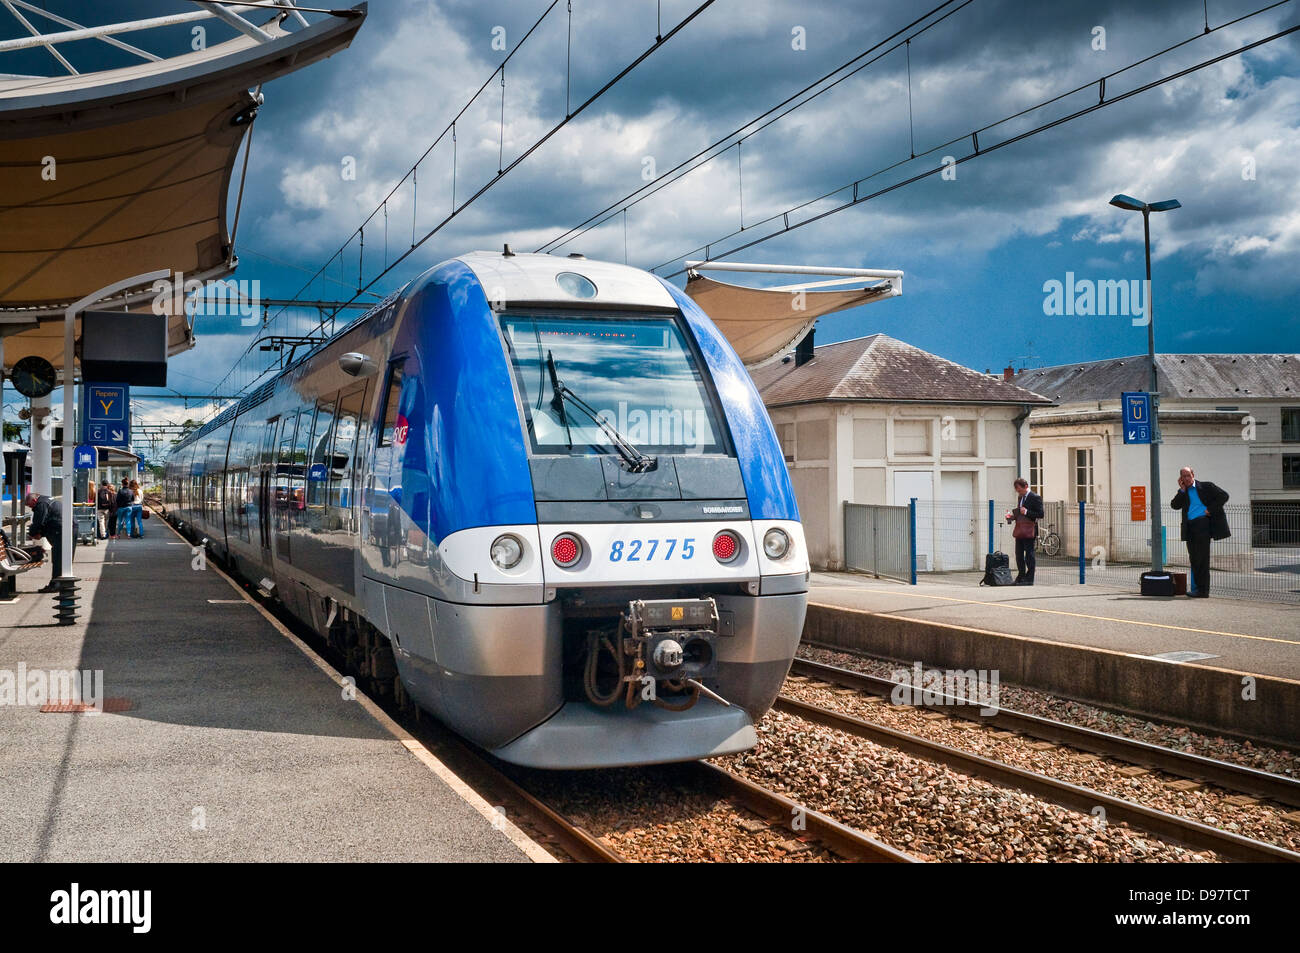 French Bombardier commuter train arriving at station - France. Stock Photo